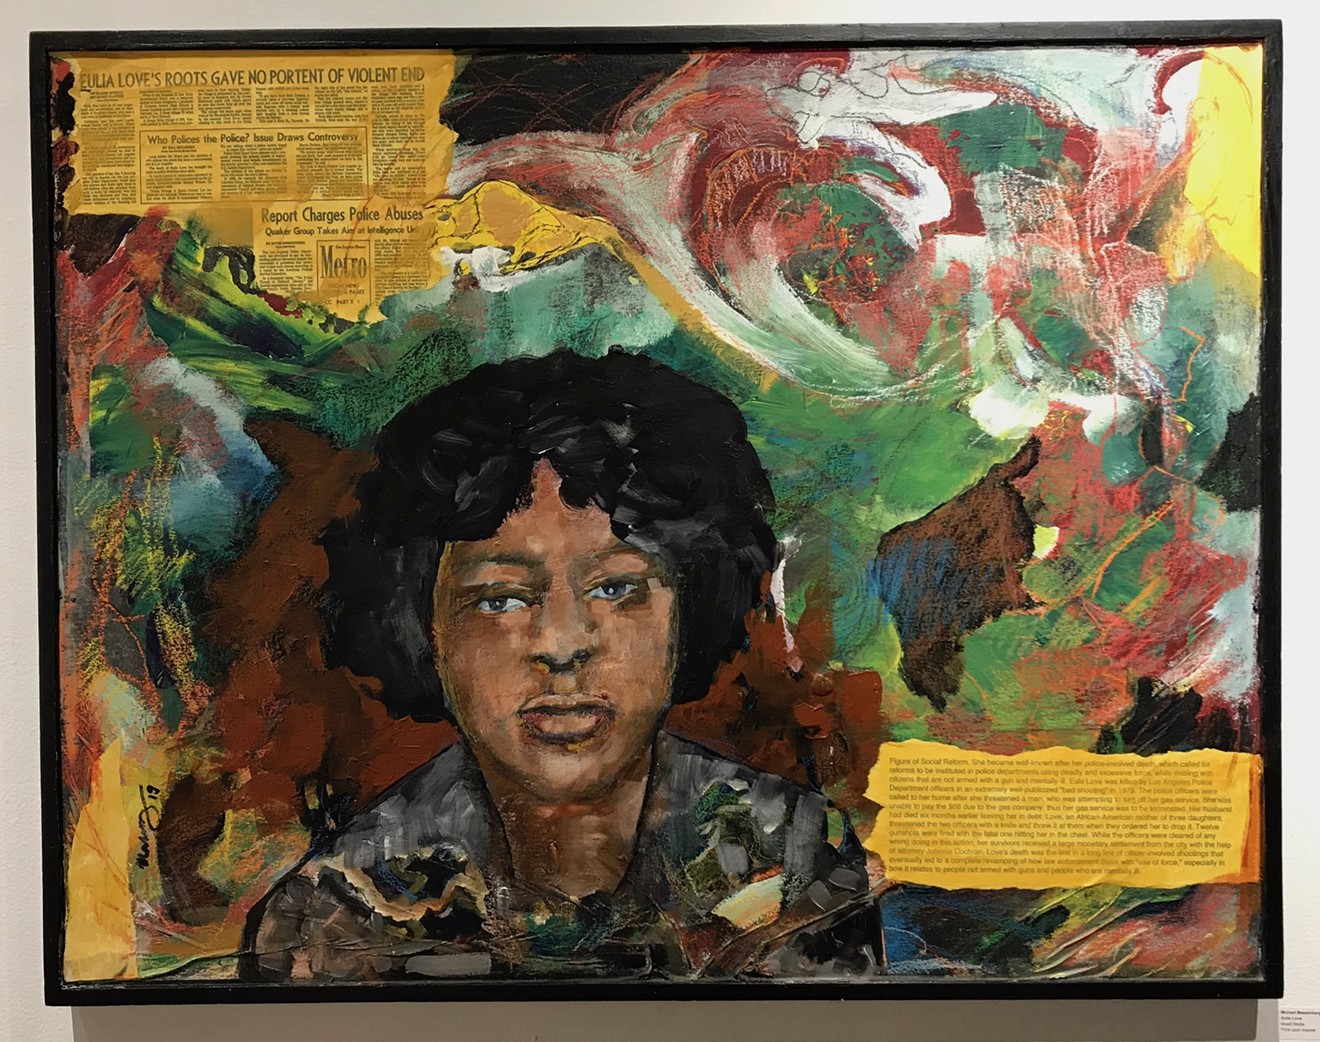 Michael Massenberg's mixed-media portrait of Eulia Love, who was killed by LAPD officers in 1979.